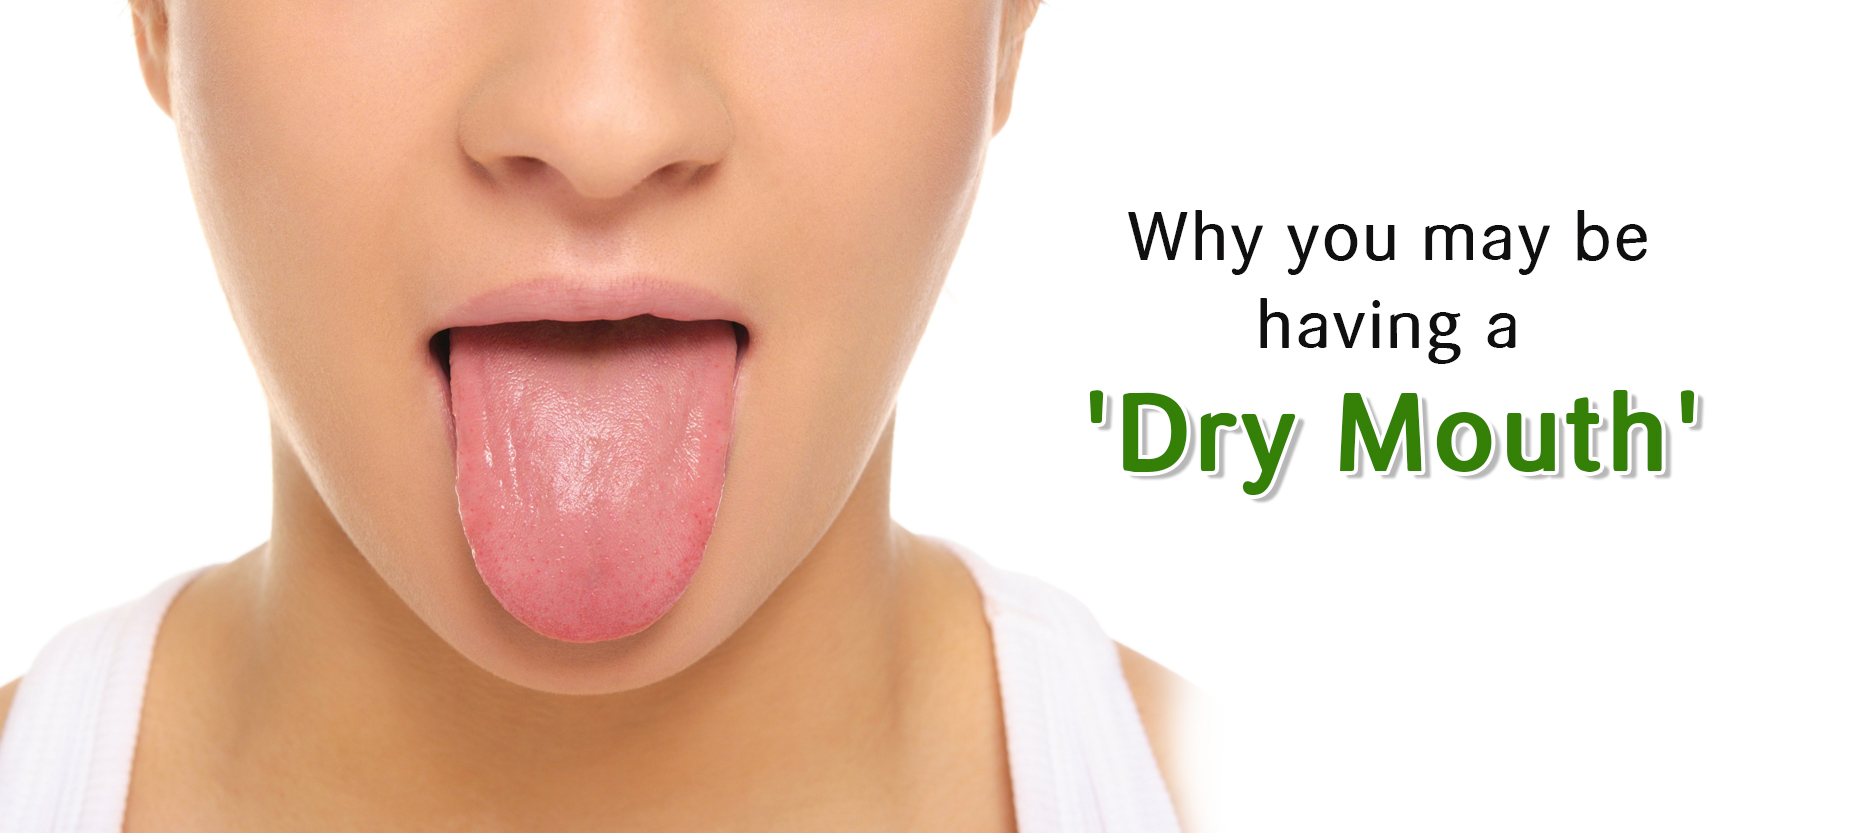 Dry Mouth: Symptoms and Reasons